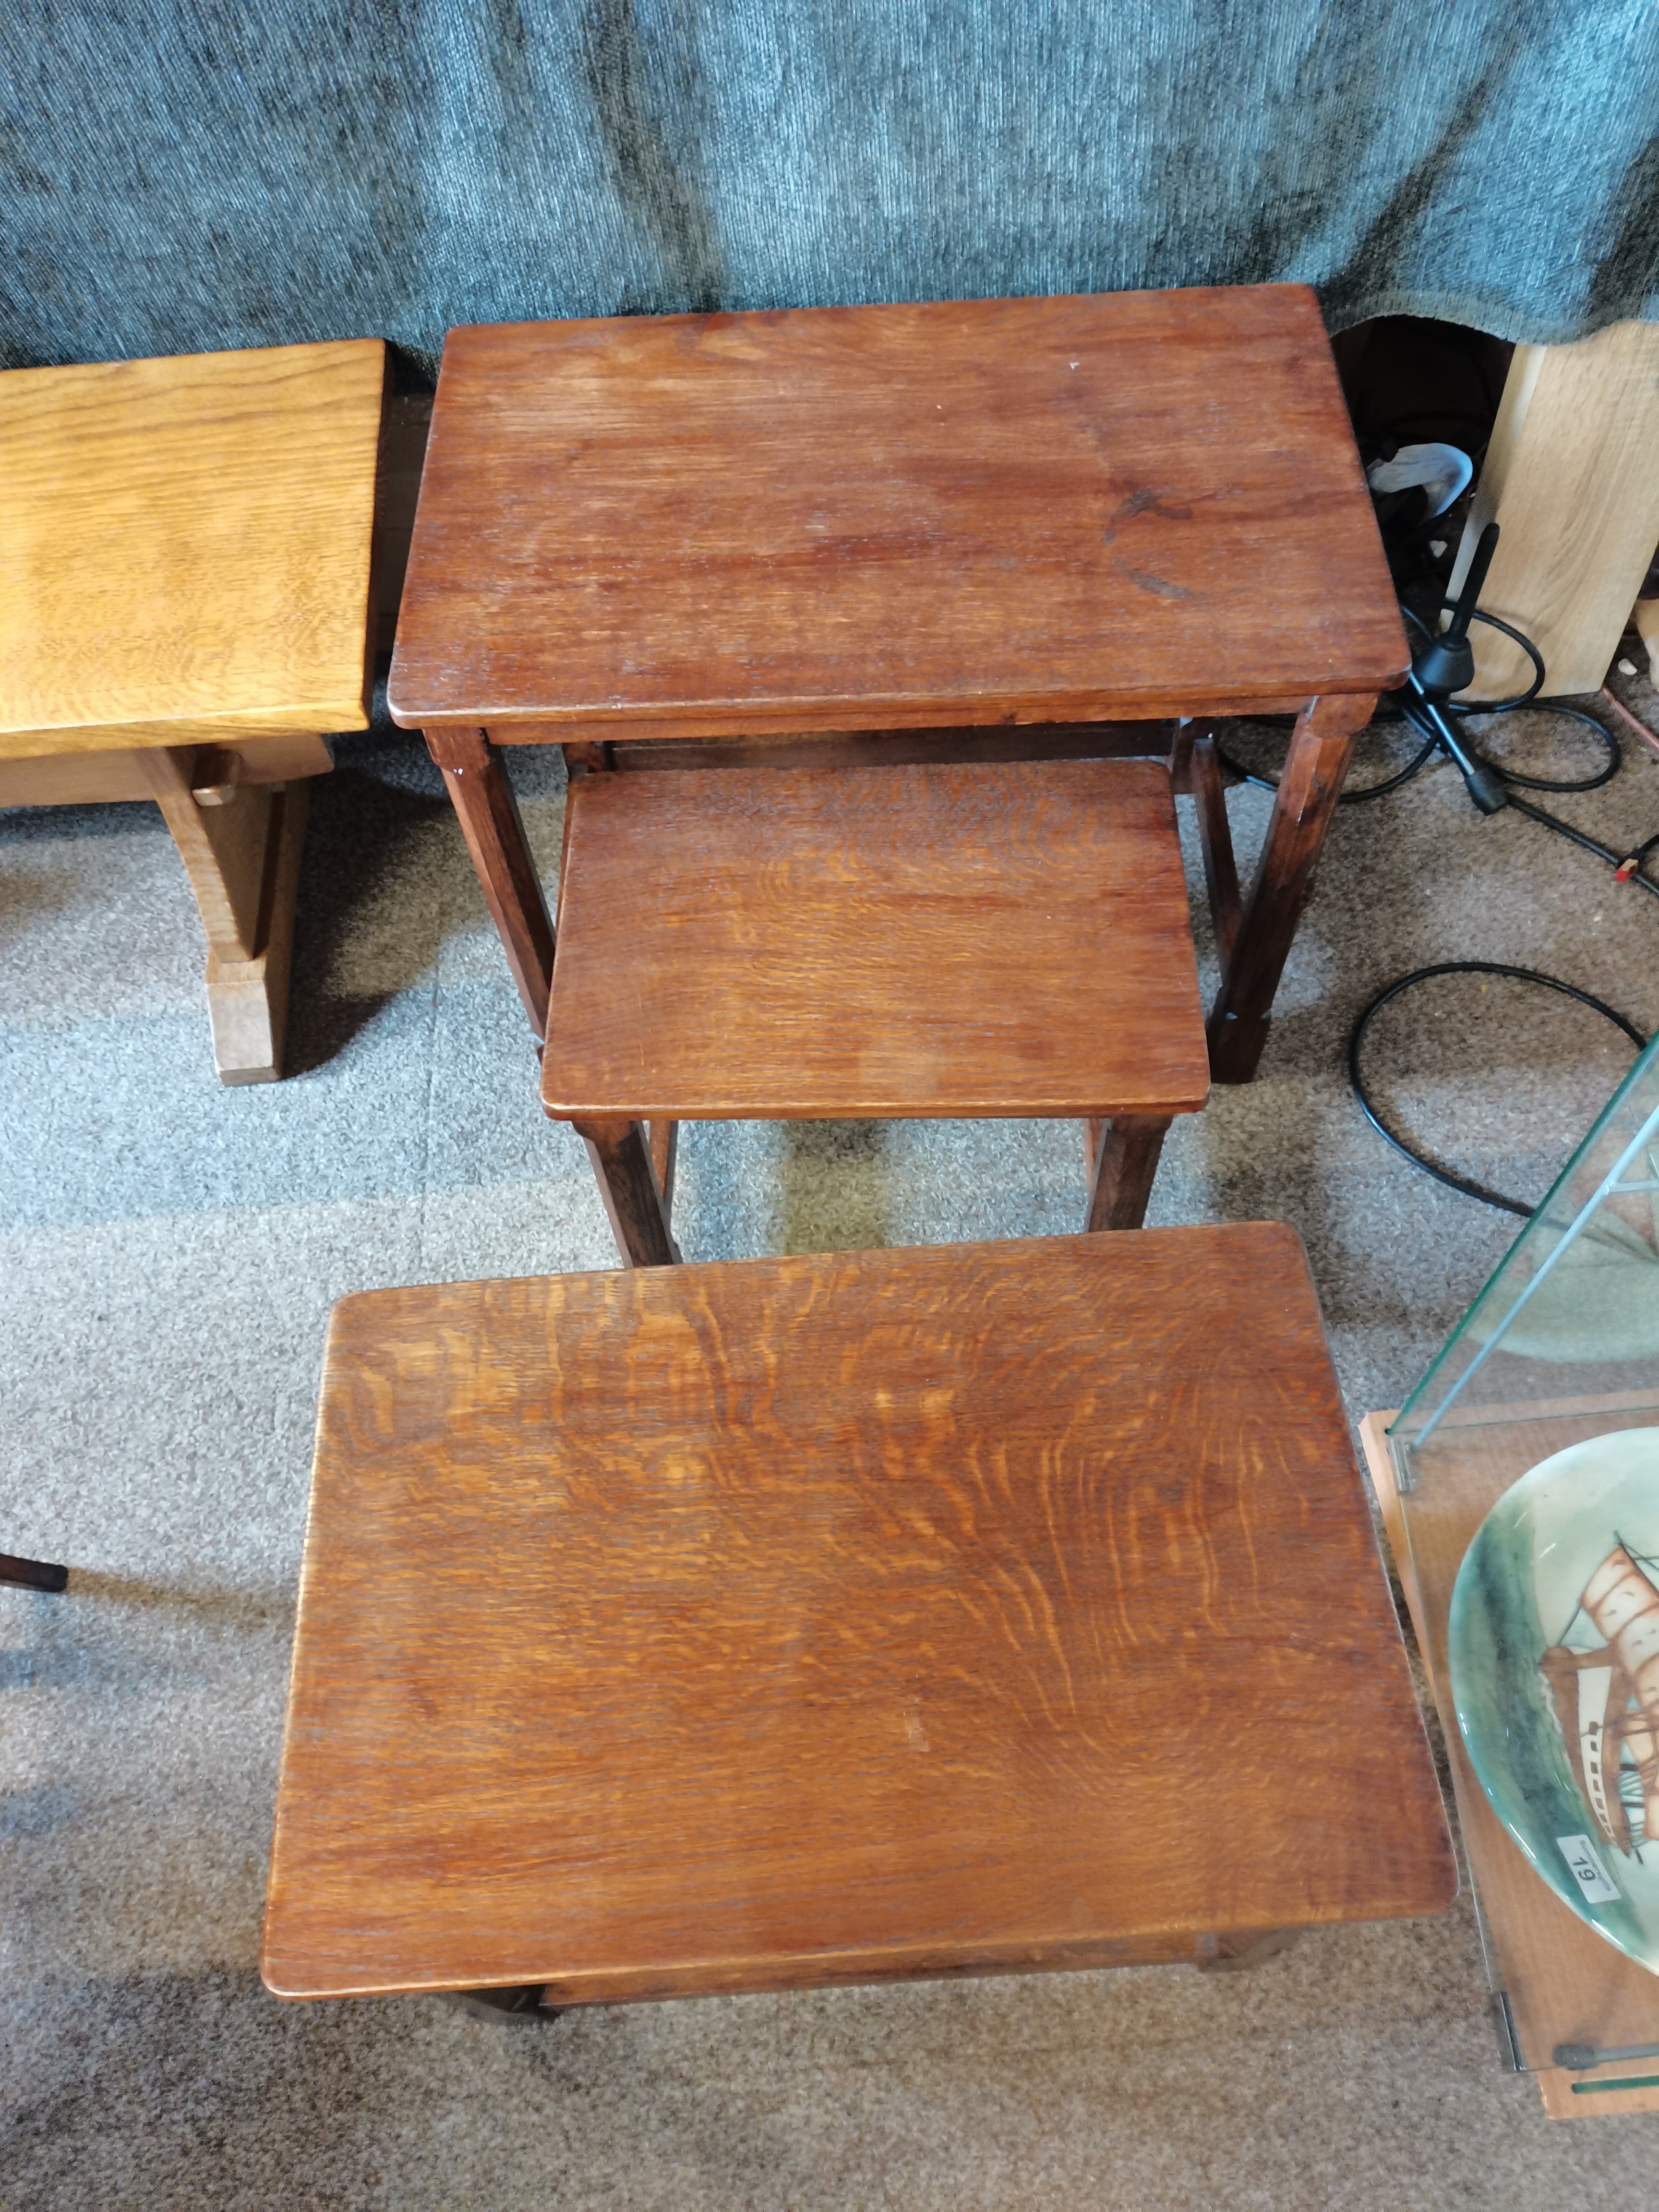 Mouseman nest of tables - Image 2 of 2